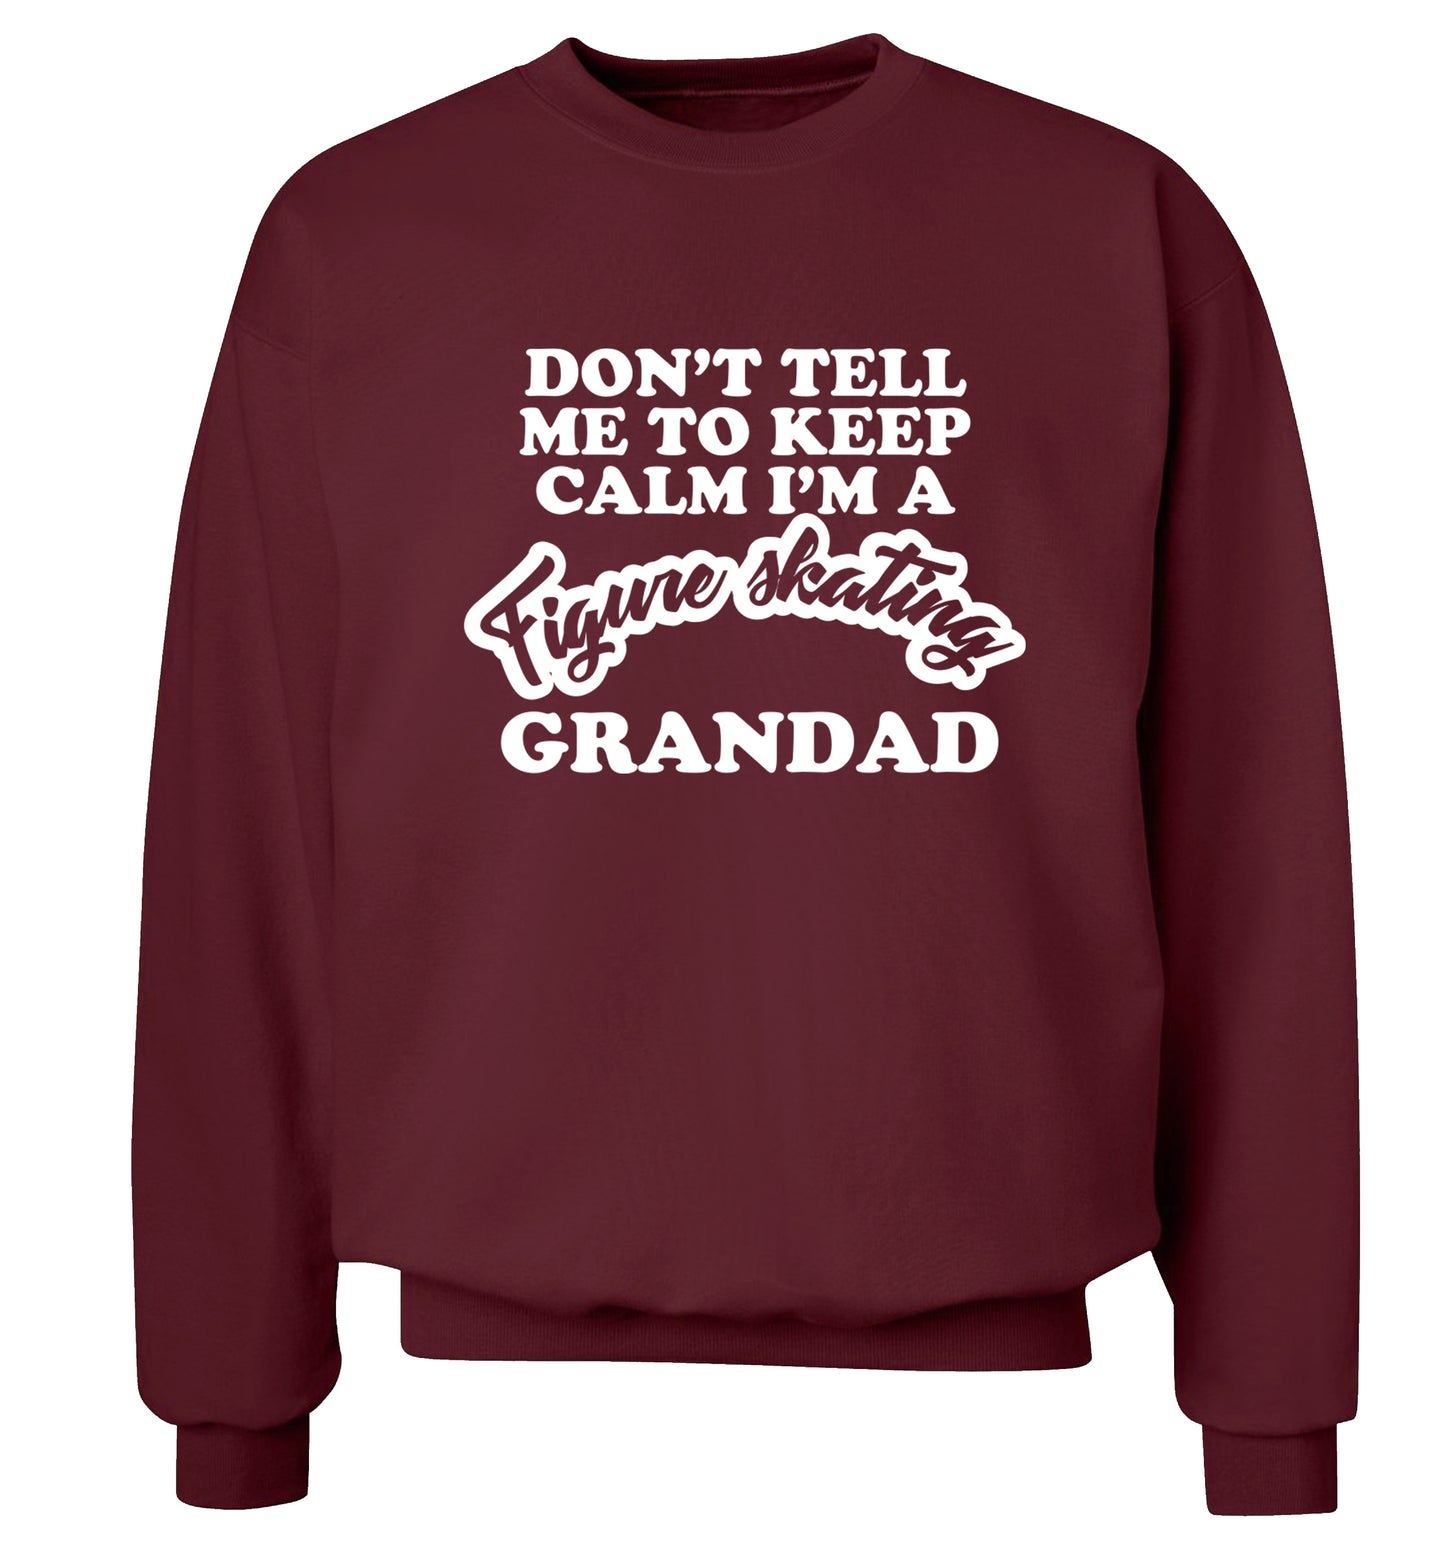 Don't tell me to keep calm I'm a figure skating grandad Adult's unisexmaroon Sweater 2XL